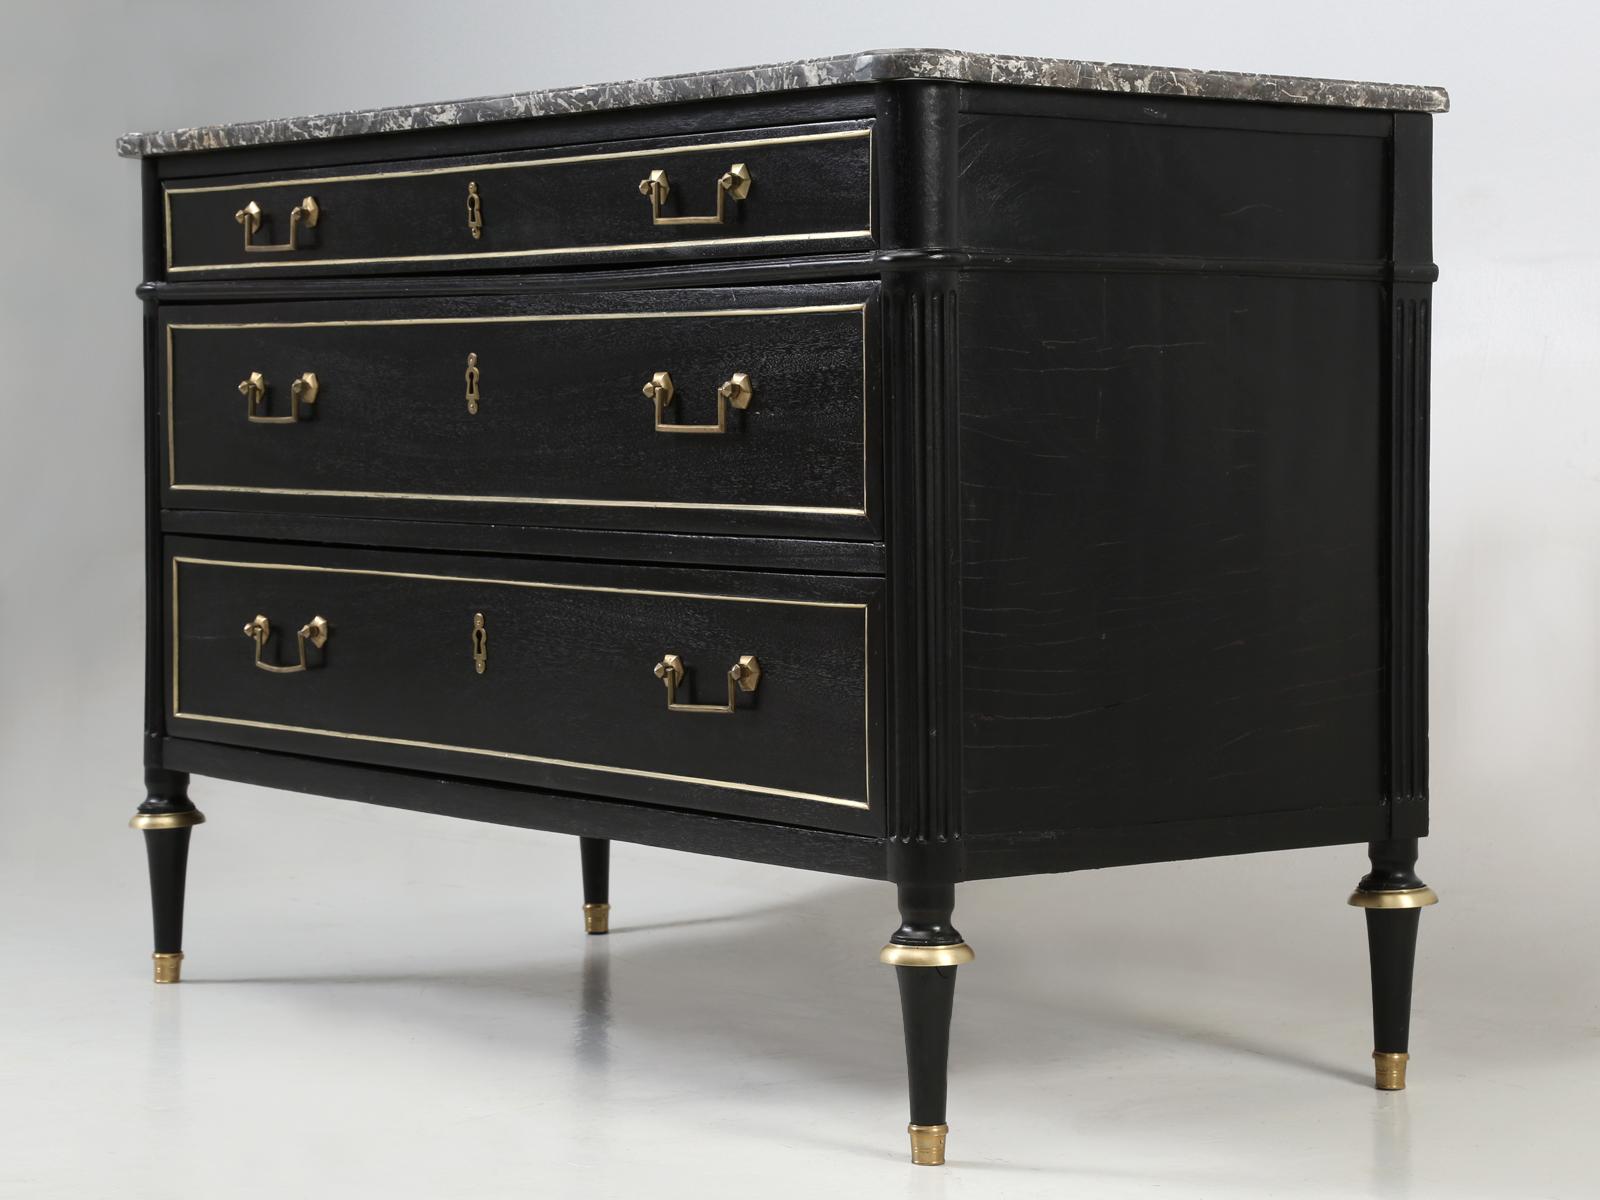 Antique French Louis XVI style commode, with its original grey marble top. Our in-house Old Plank restoration department, hand-stripped the entire antique French commode and applied a real French ebonized finish, where the grain of the mahogany and